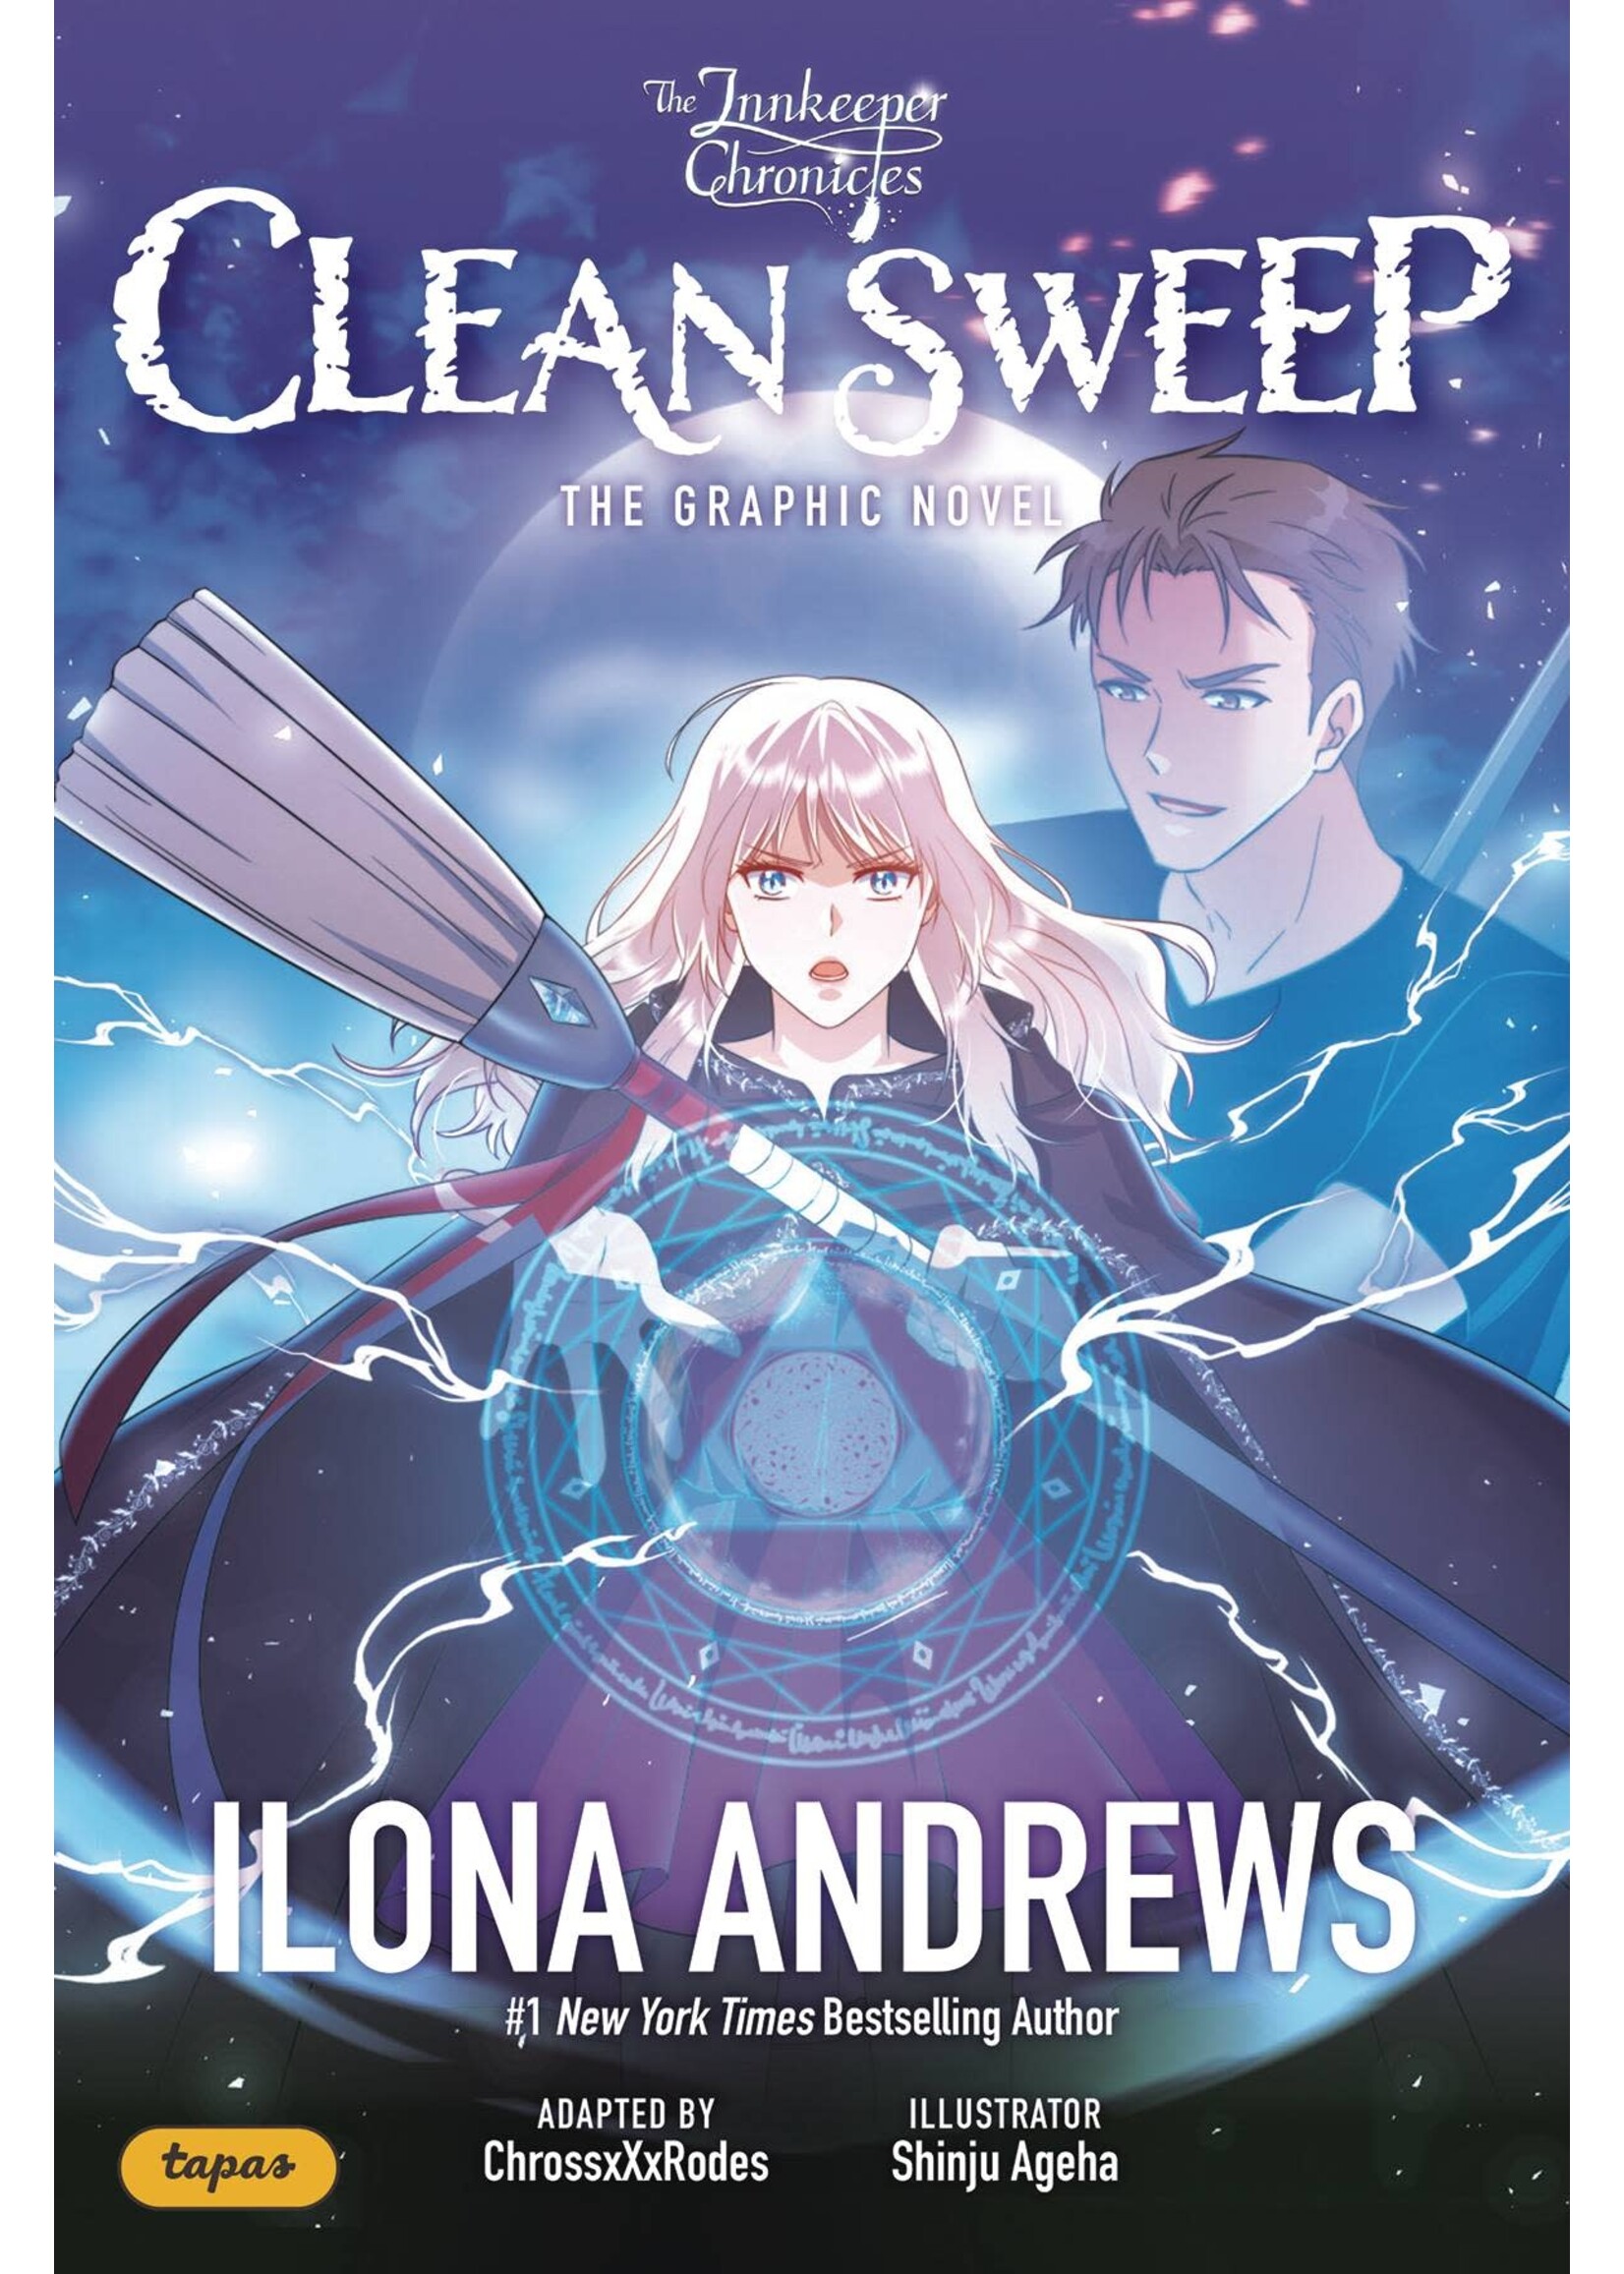 ANDREWS MCMEEL INNKEEPER CHRONICLES CLEAN SWEEP GN